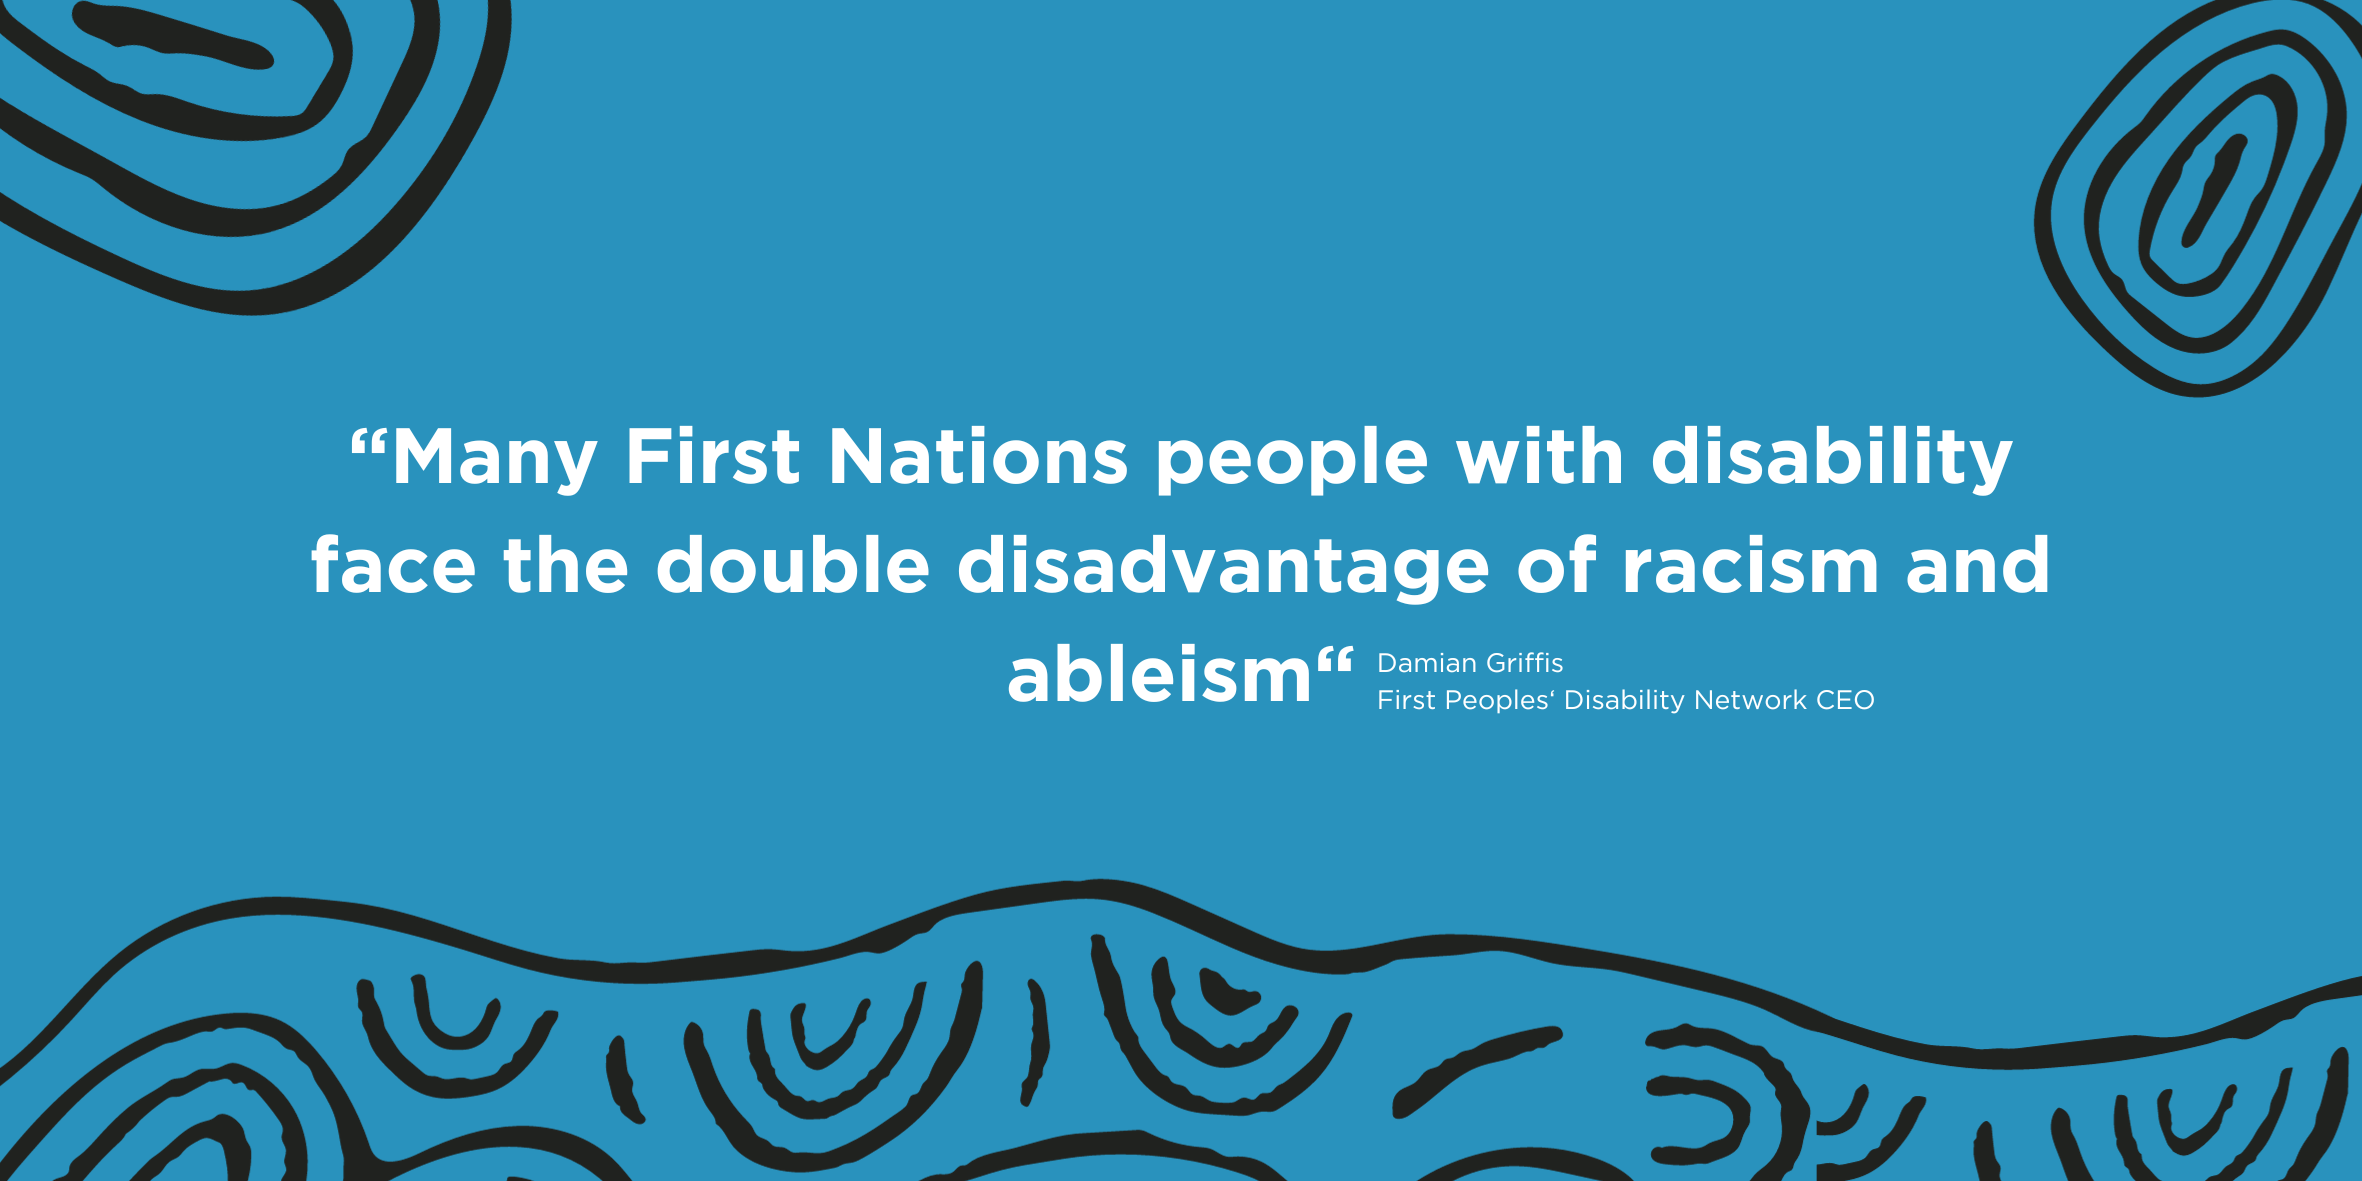 ALT TEXT: Large white text saying Many First Nations people with disability face the double disadvantage of racism and ableism. Small white text attributing quote to Damian Griffis First Peoples Disability Network CEO.